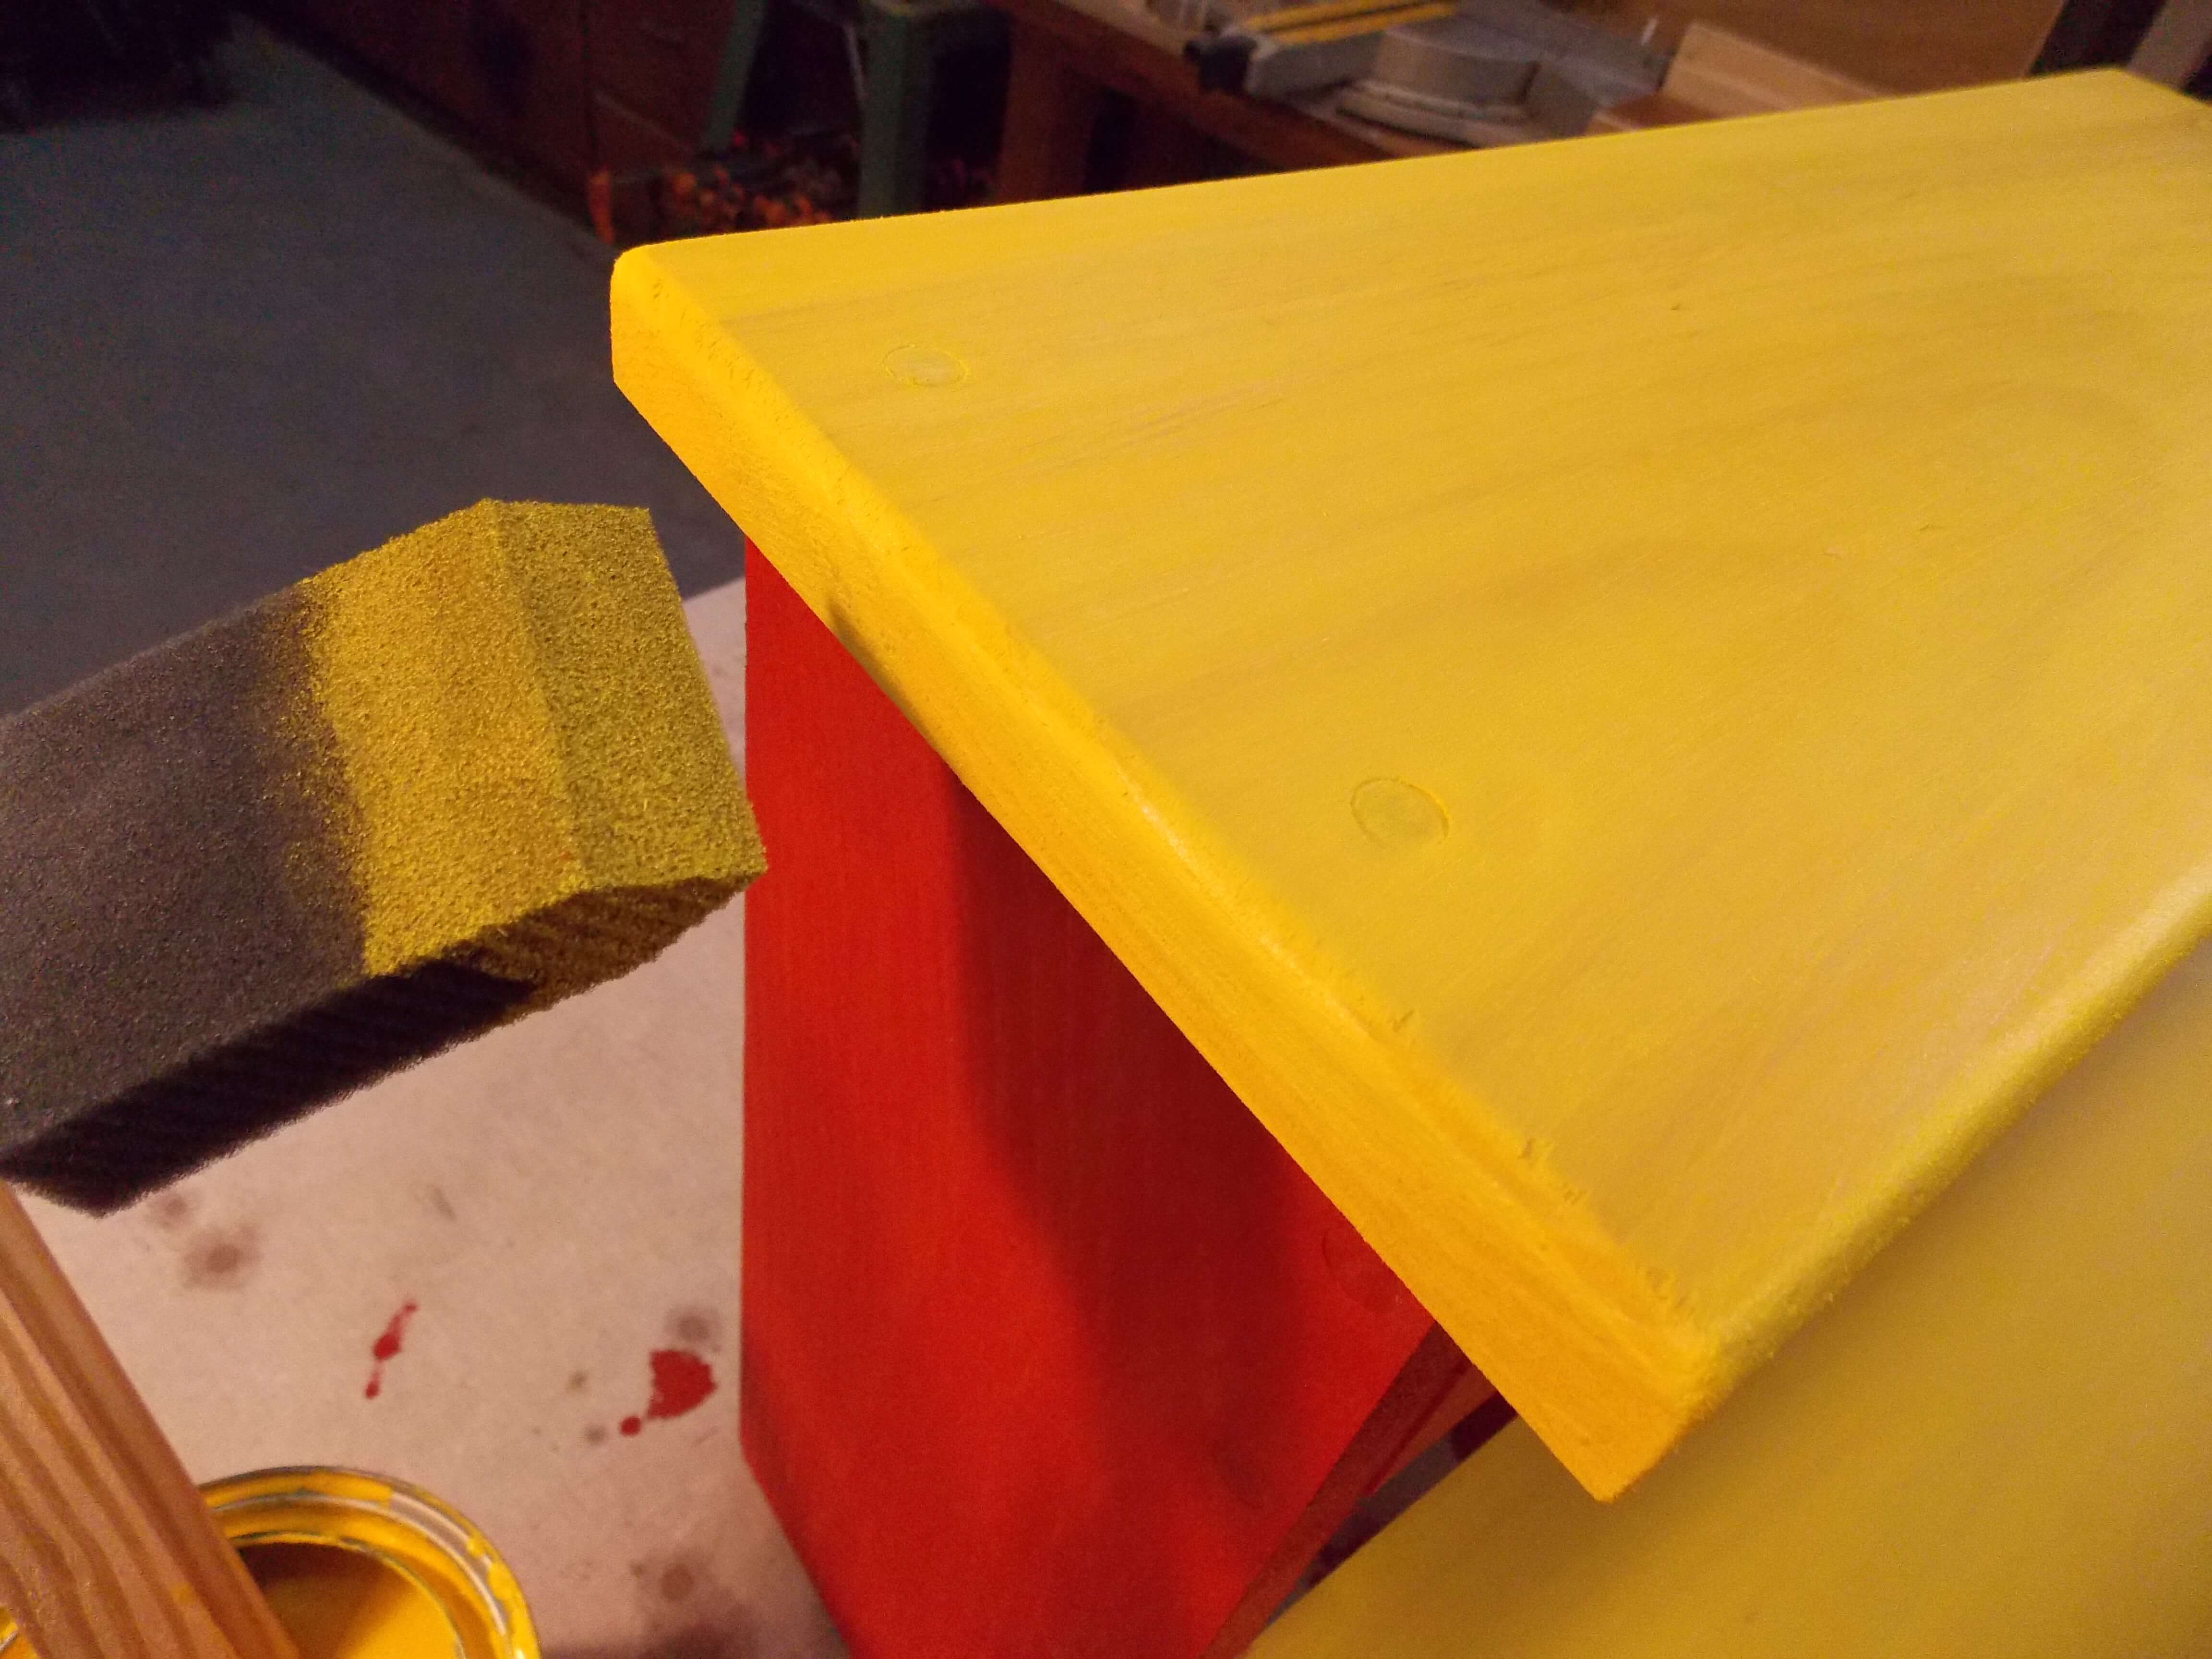 Minwax Water Based Wood Stain in Mustard Applied to Step Stool